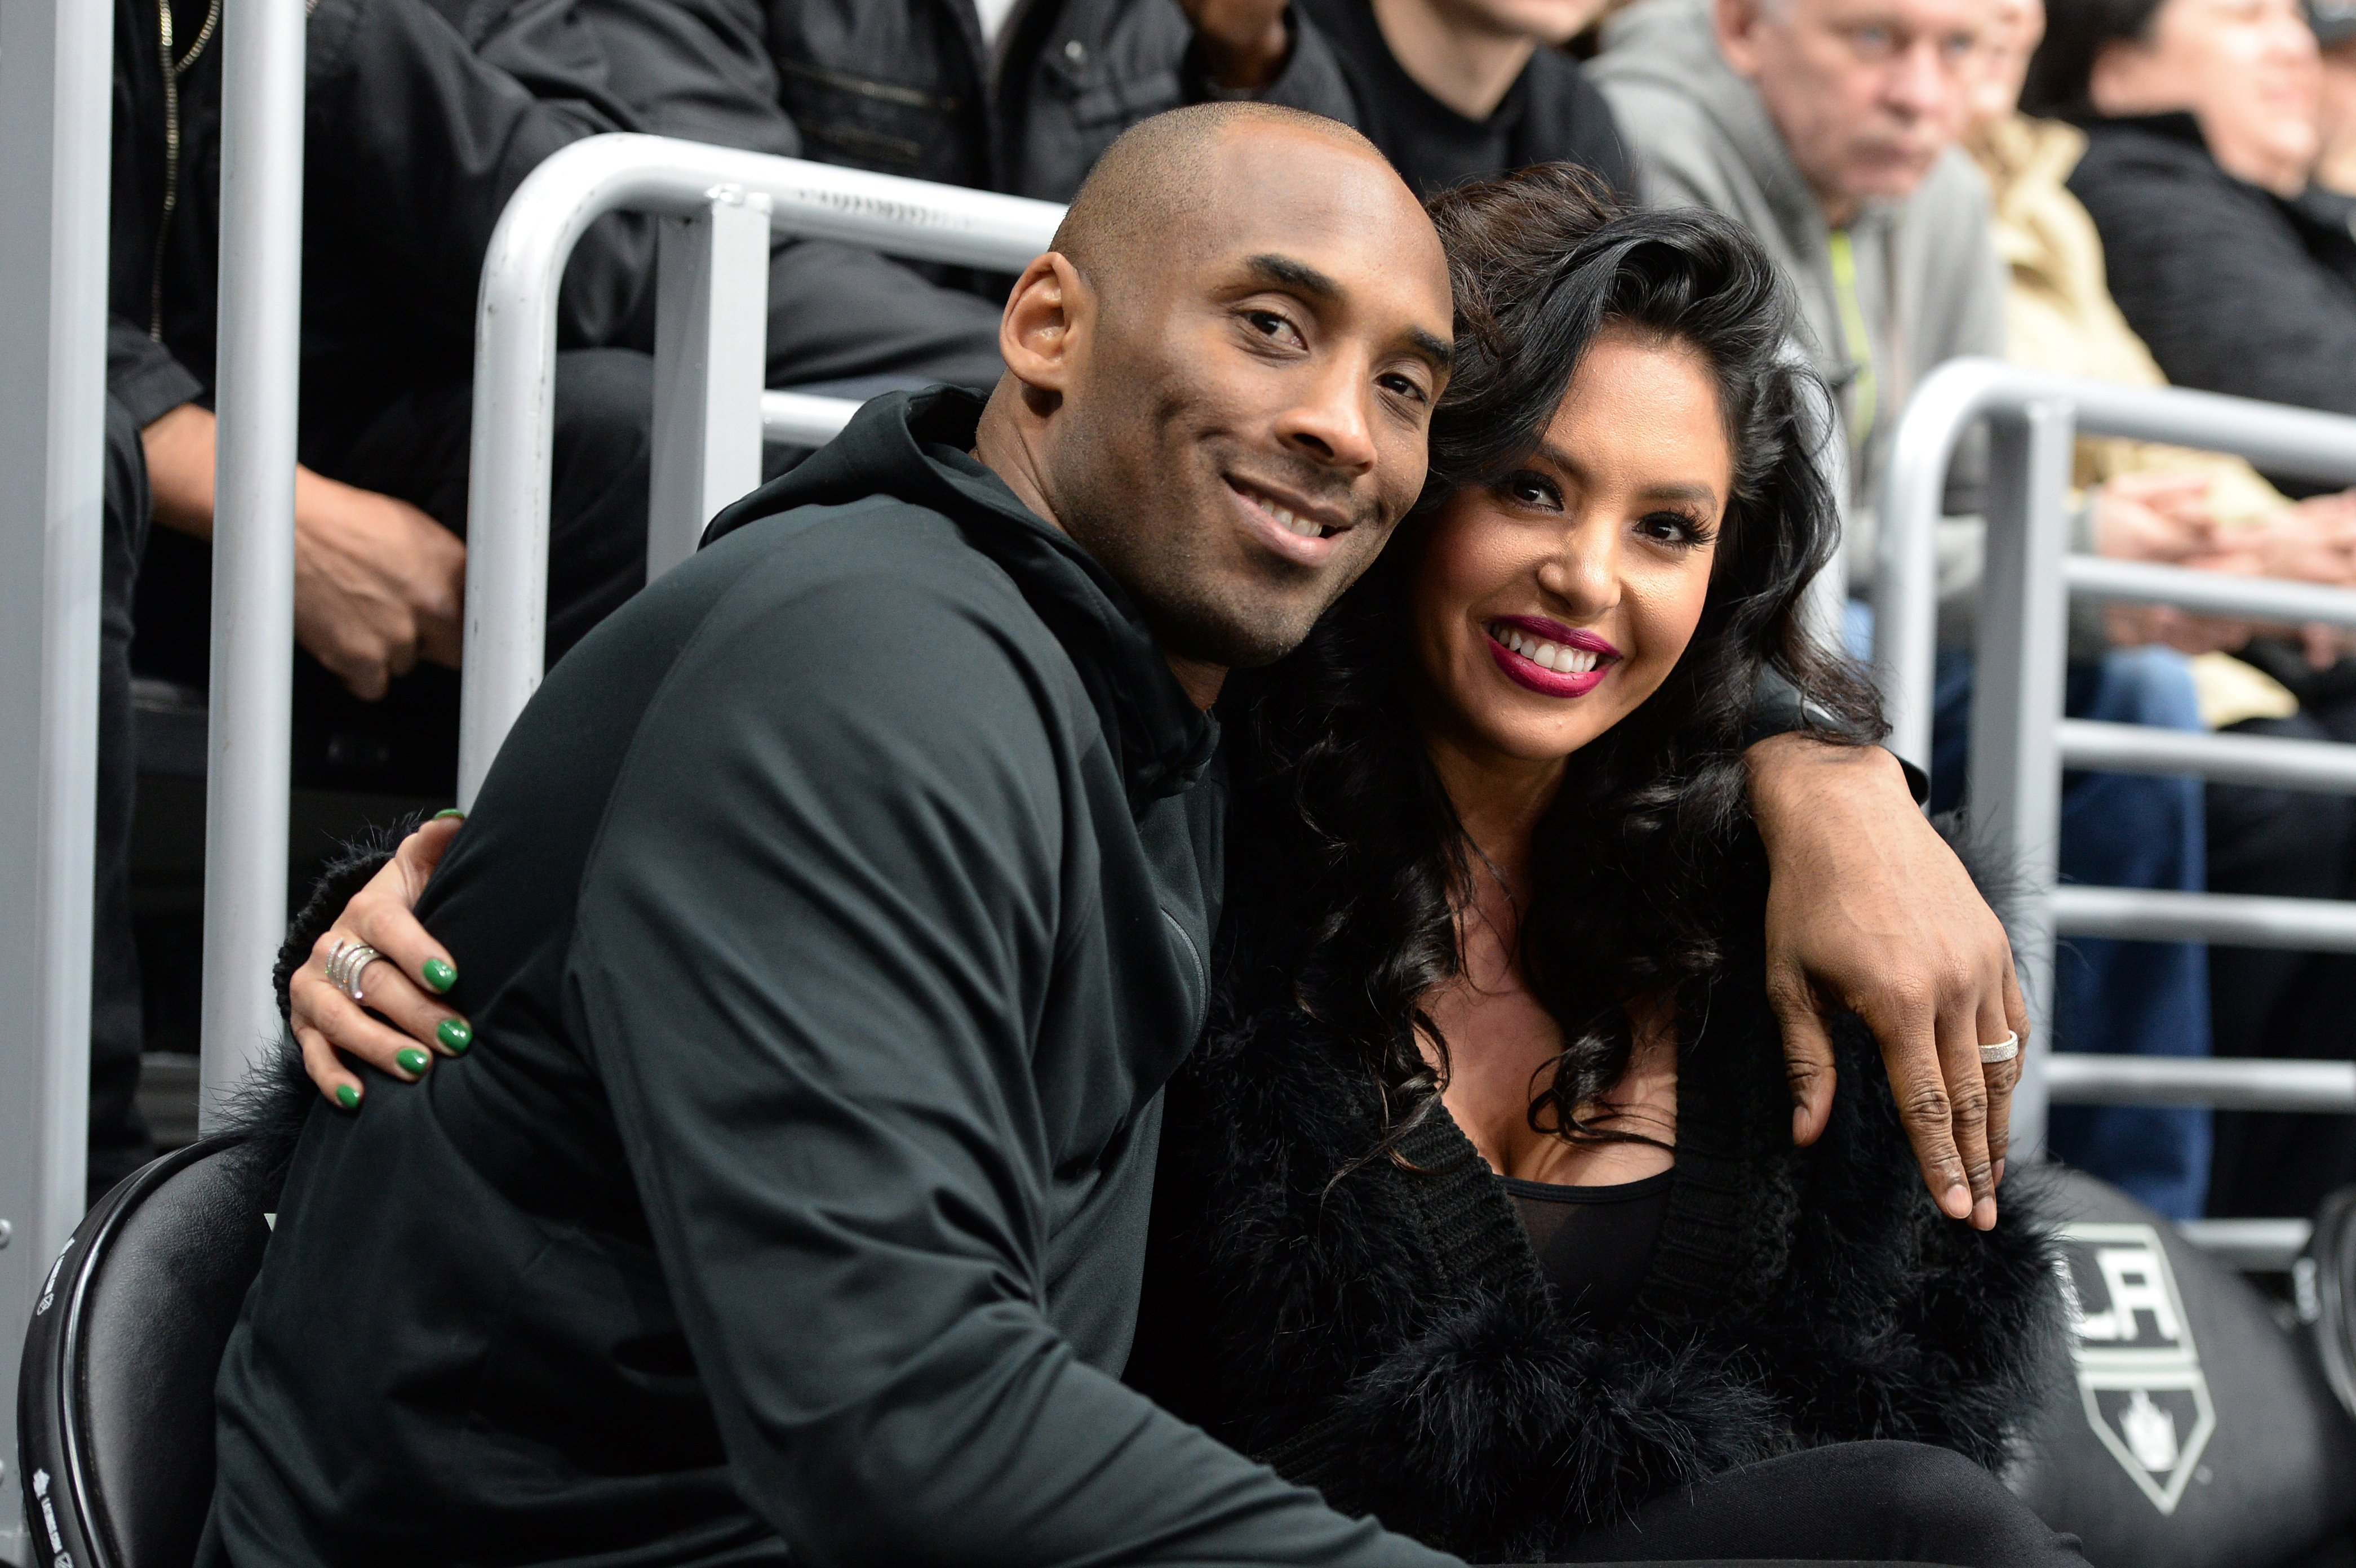 Guard Kobe Bryant and his wife Vanessa Bryant pose for a photo during a game between the Los Angeles Kings and the Washington Capitals at STAPLES Center on March 09, 2016  | Photo: GettyImages